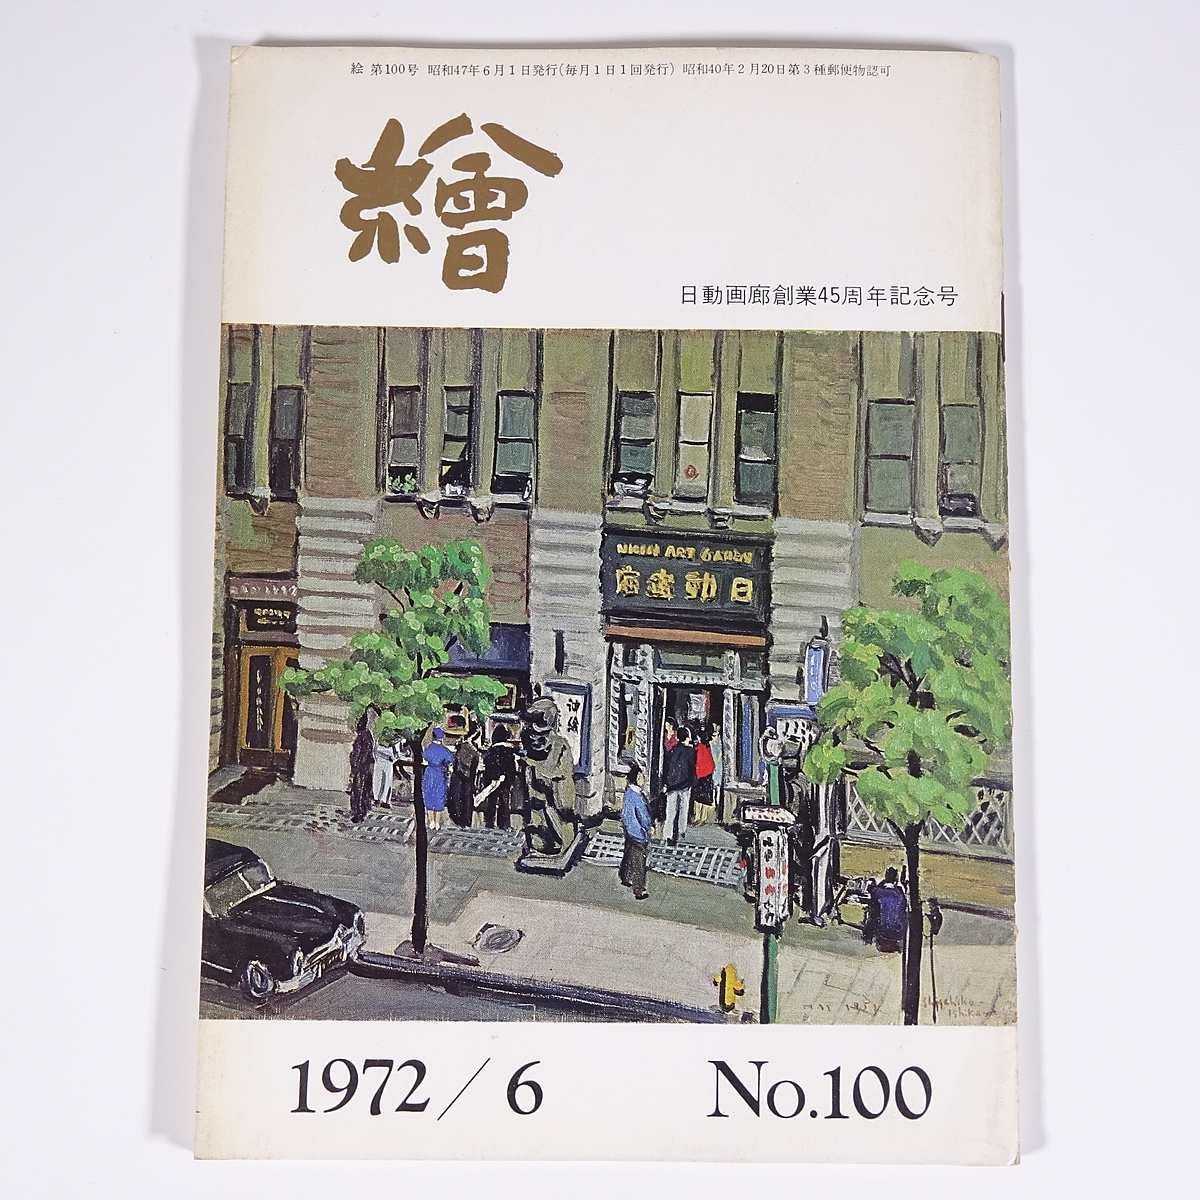  monthly magazine ..No.100 1972/6 day animation . small booklet art fine art picture special collection * day animation . establishment 45 anniversary commemoration number . shop ... times . another 